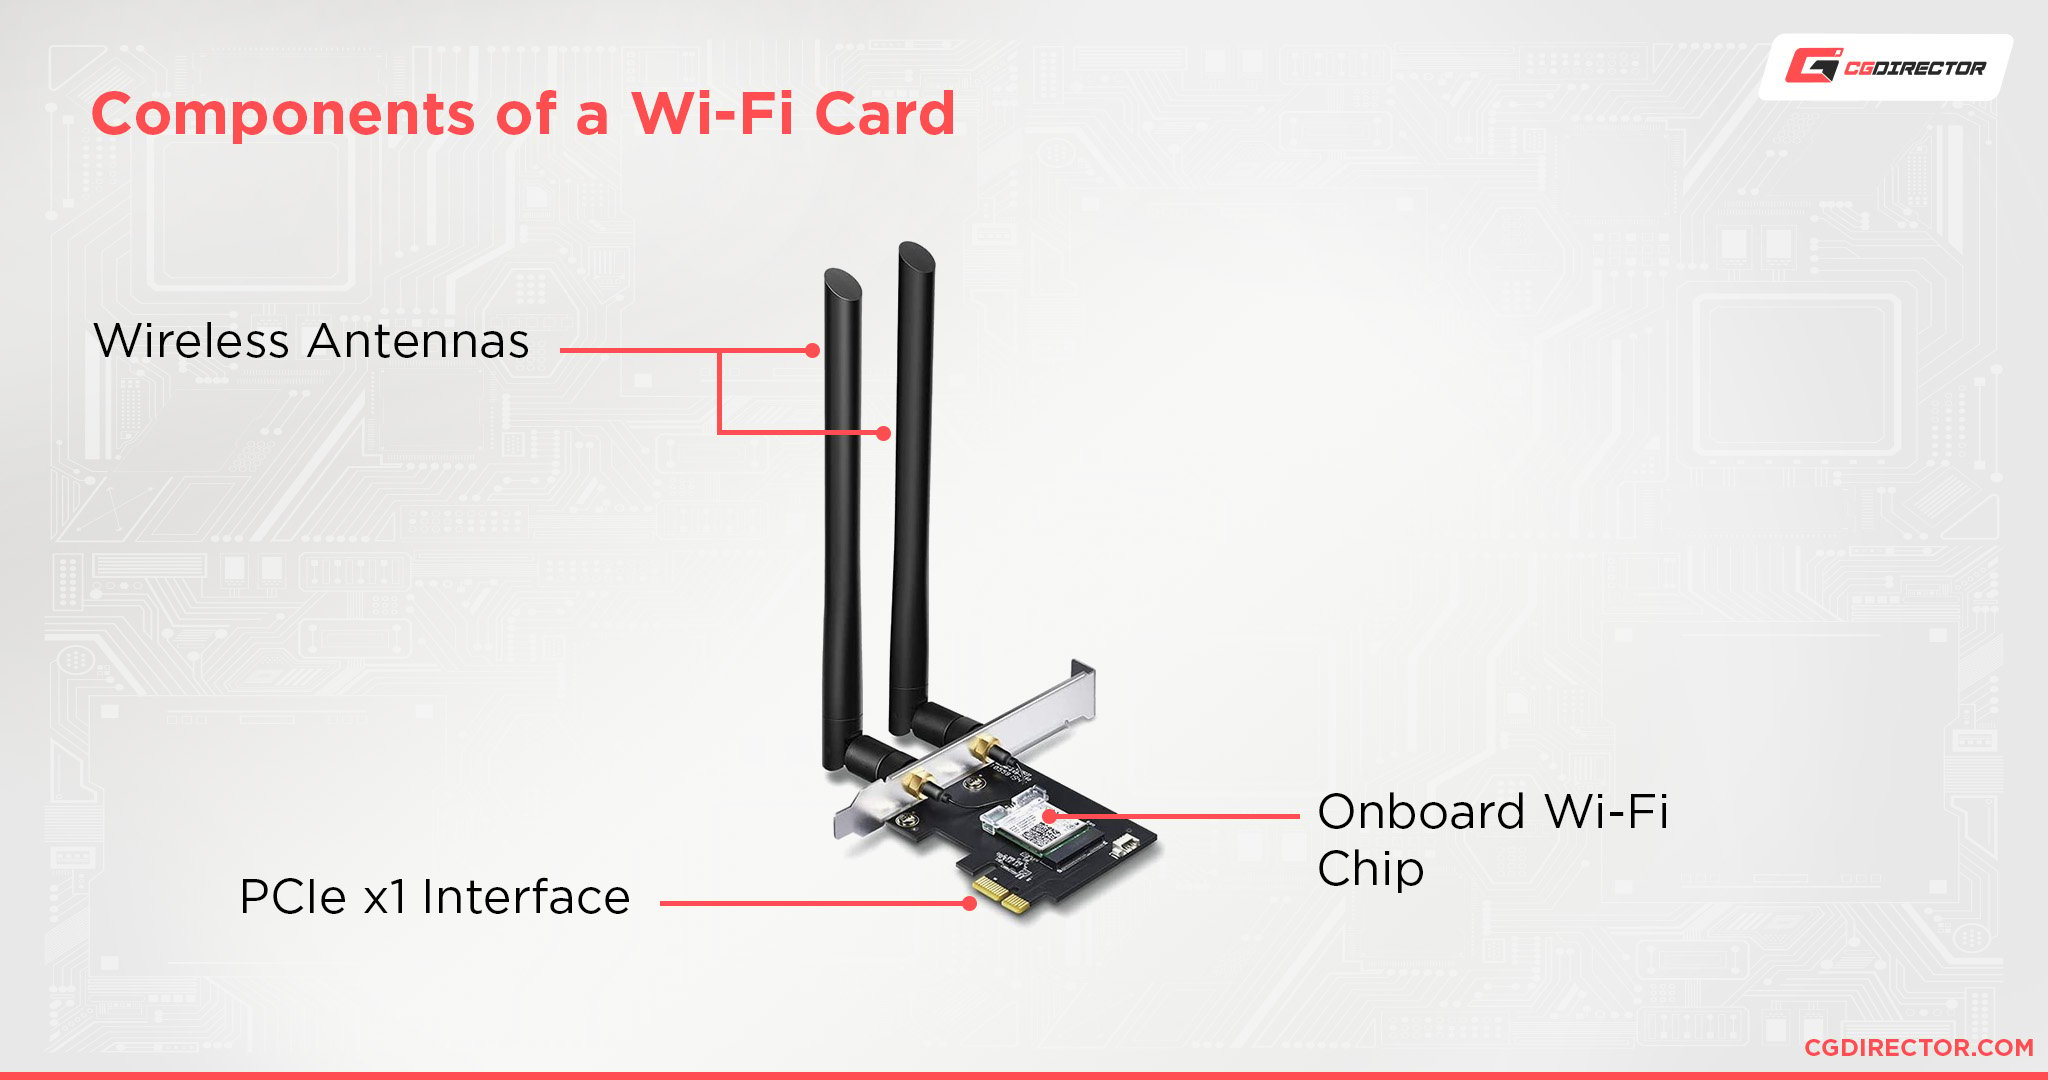 Components of a Wi-Fi Card